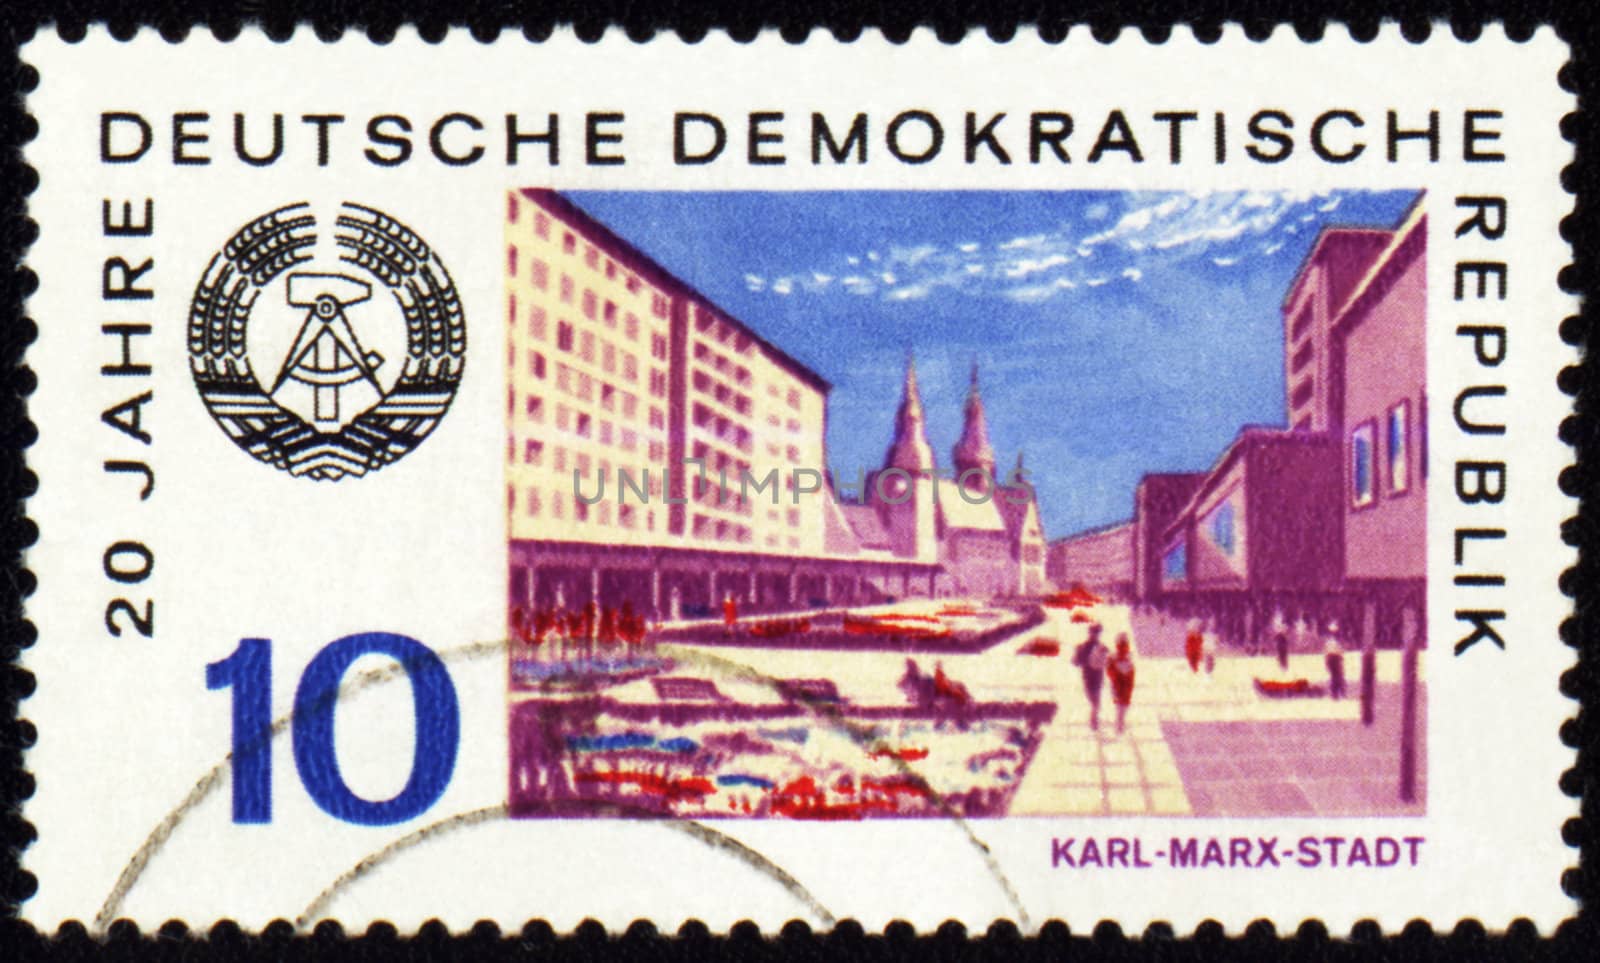 GDR - CIRCA 1969: a stamp printed in GDR (East Germany), shows Karl-Marx-Stadt in East Germany, circa 1969